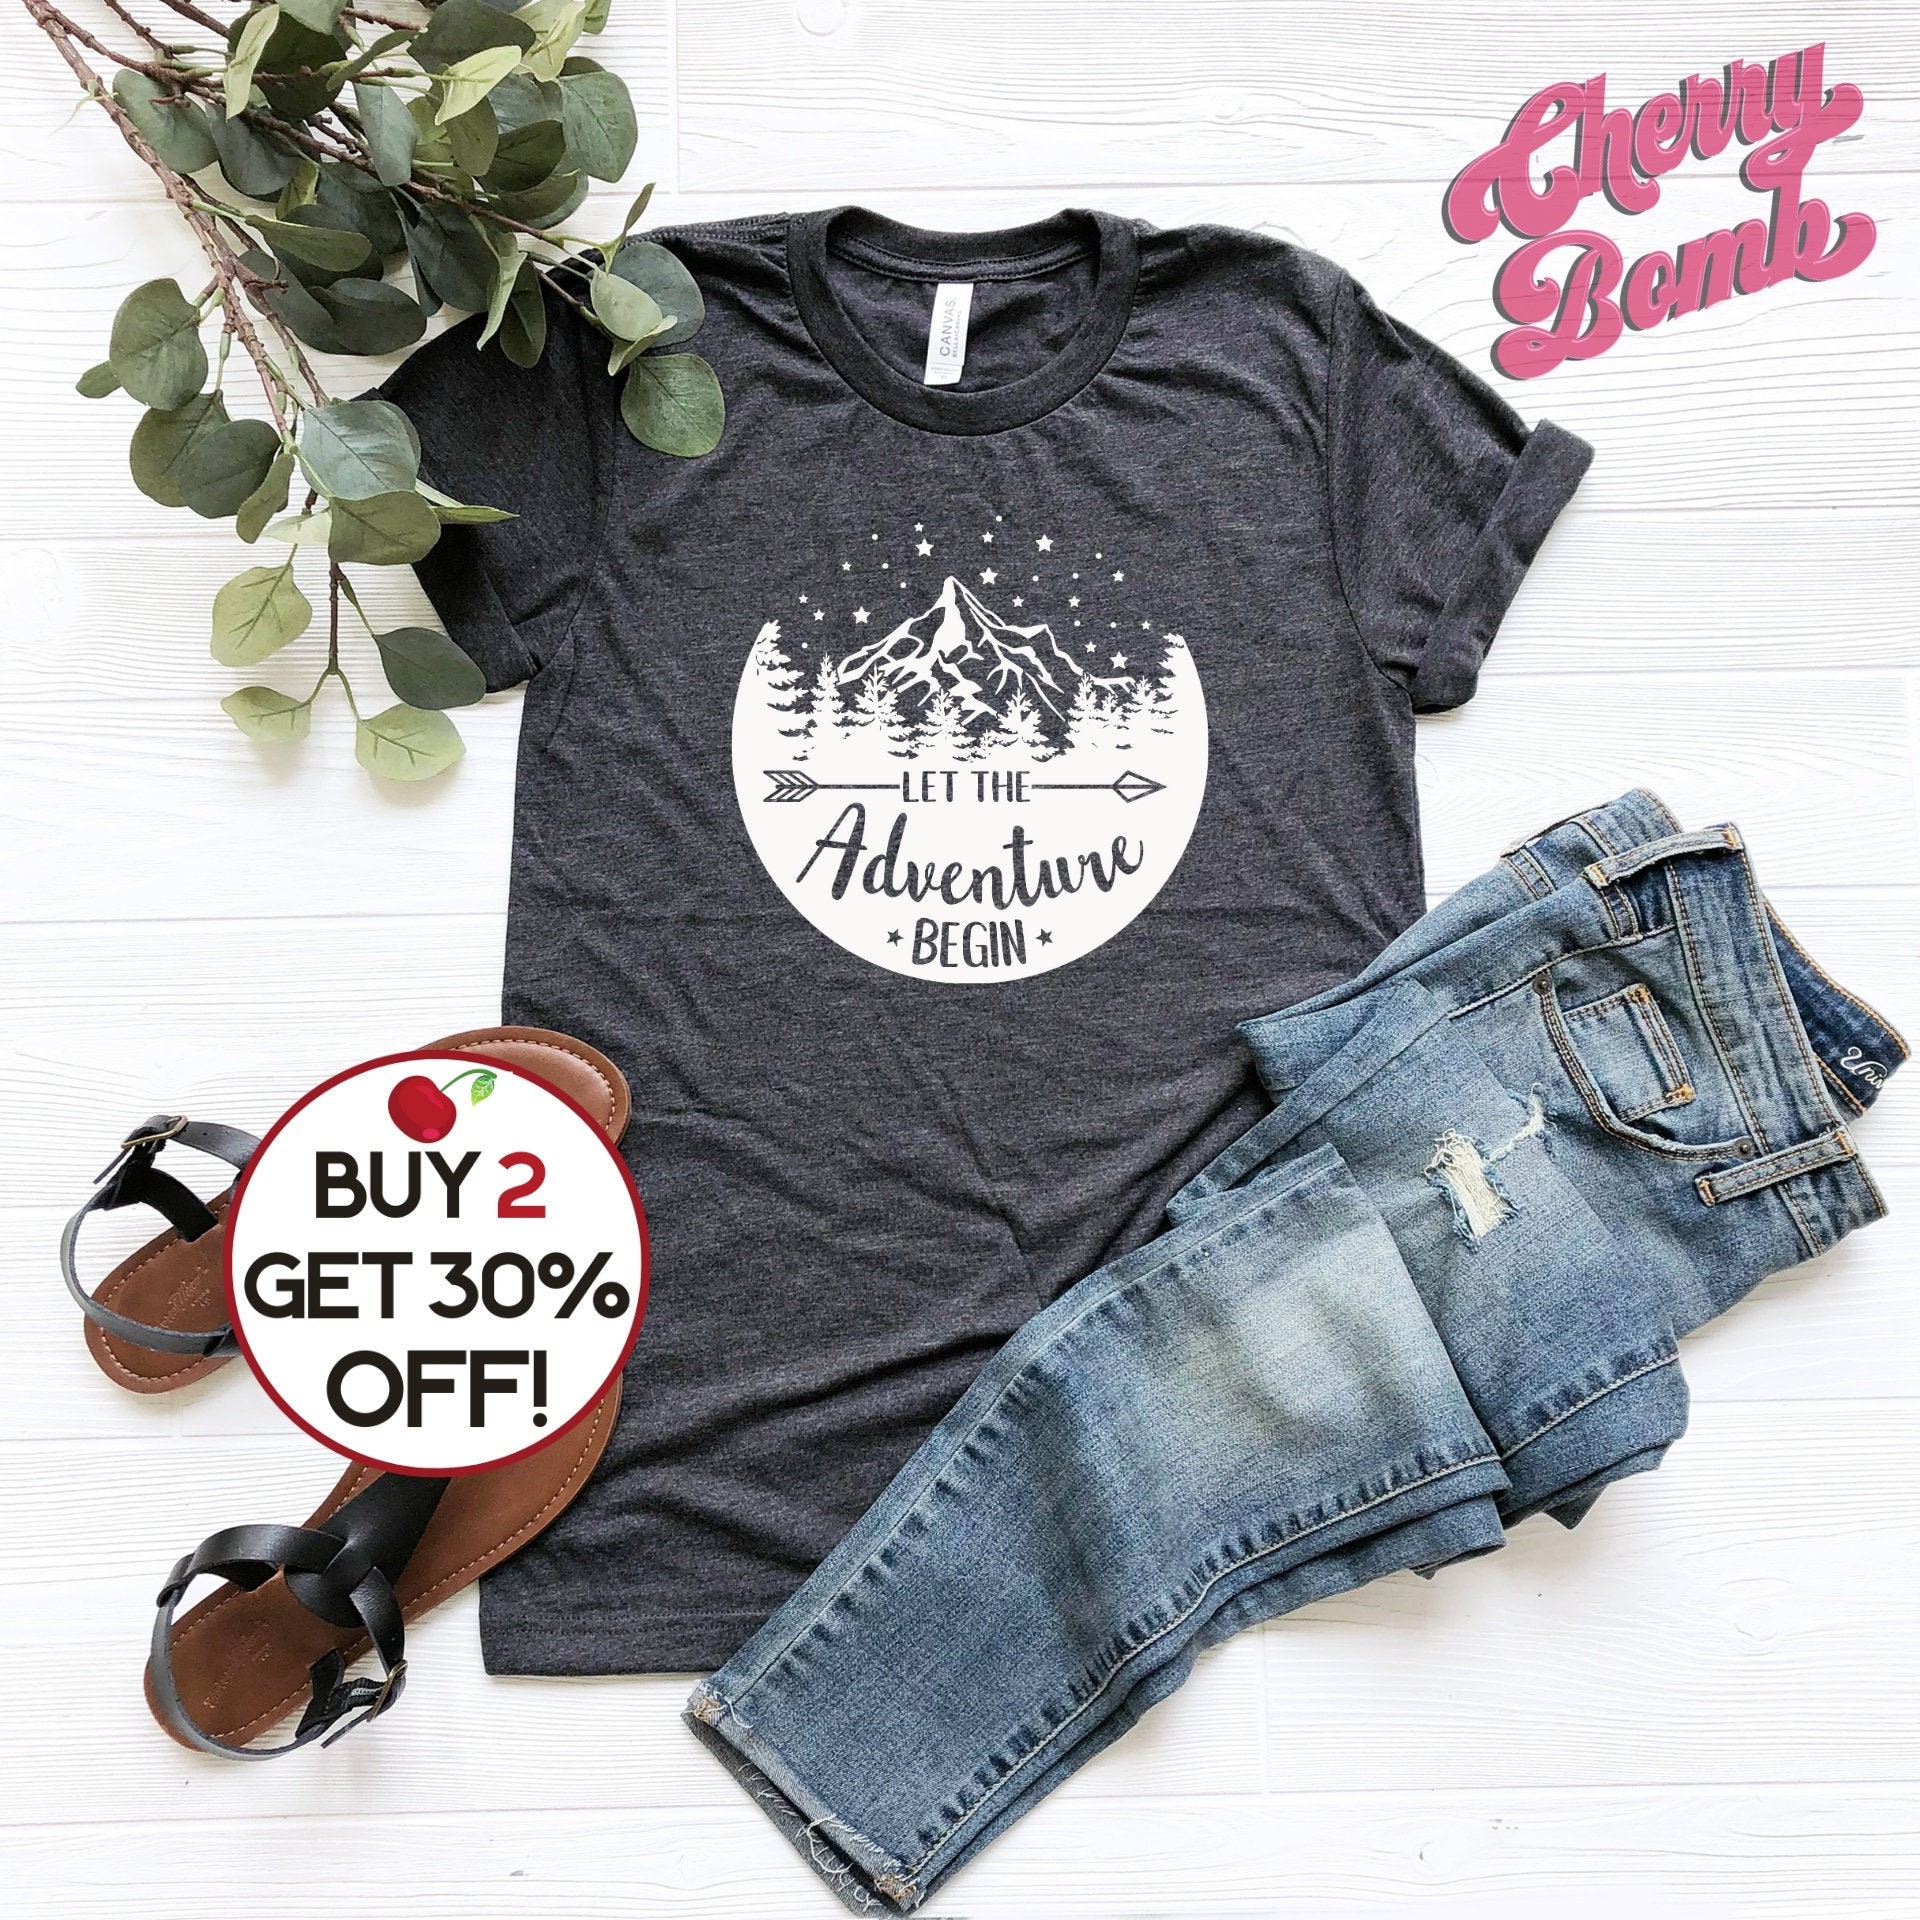 Summer Shirts Camping Gifts Women's Clothing Tshirt Graphic Tees Shirt Adventure Let The Adventure Begin Camping